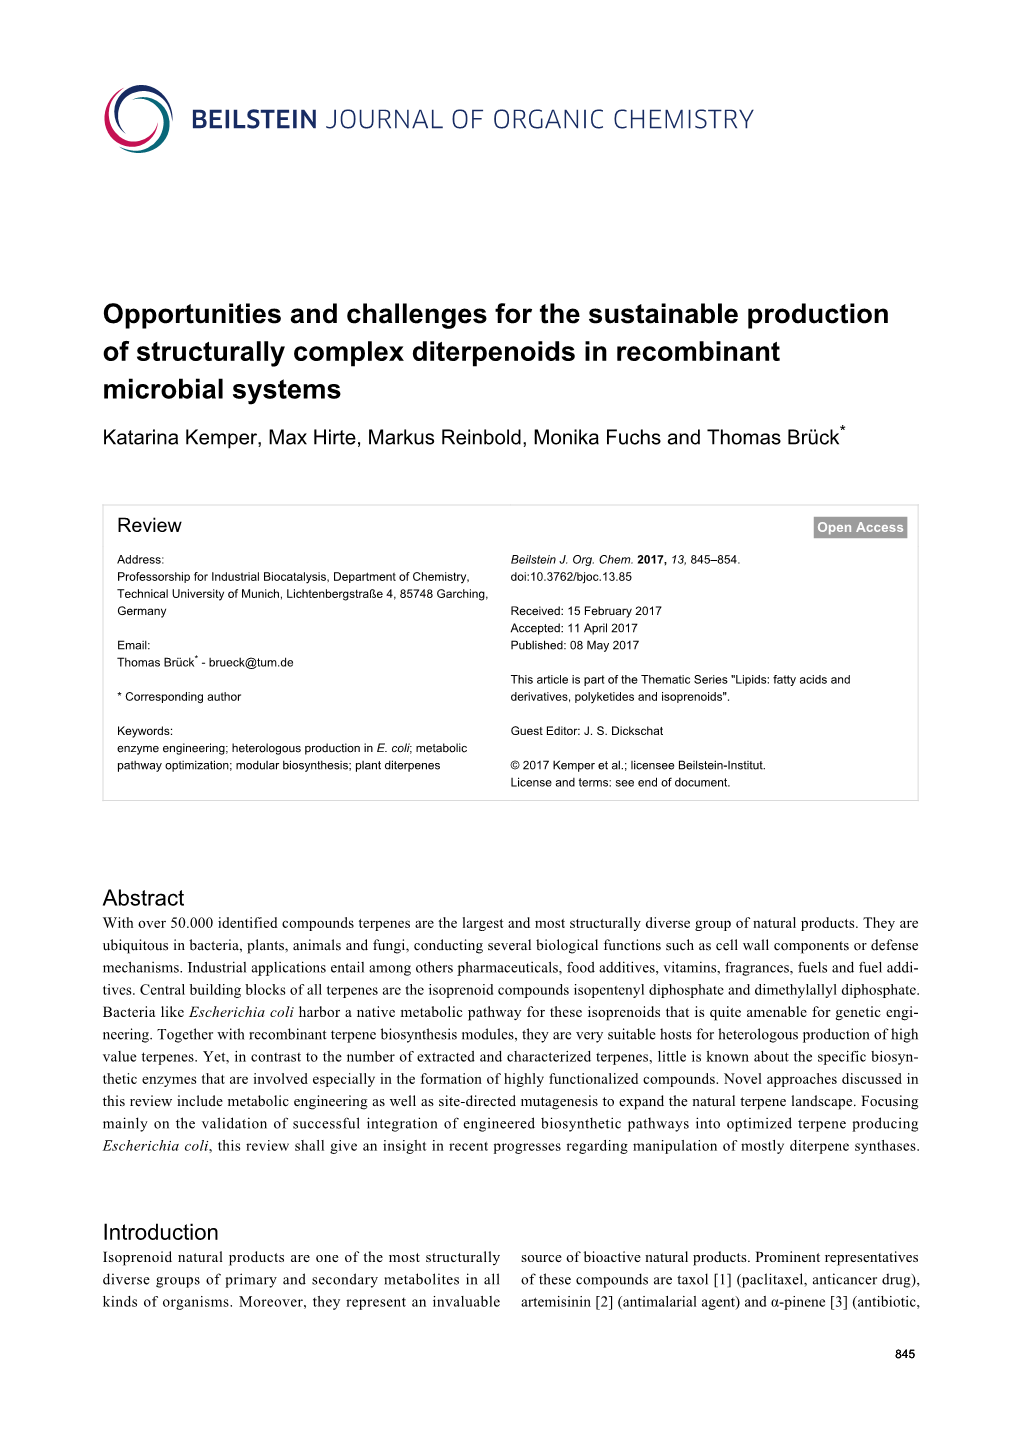 Opportunities and Challenges for the Sustainable Production of Structurally Complex Diterpenoids in Recombinant Microbial Systems